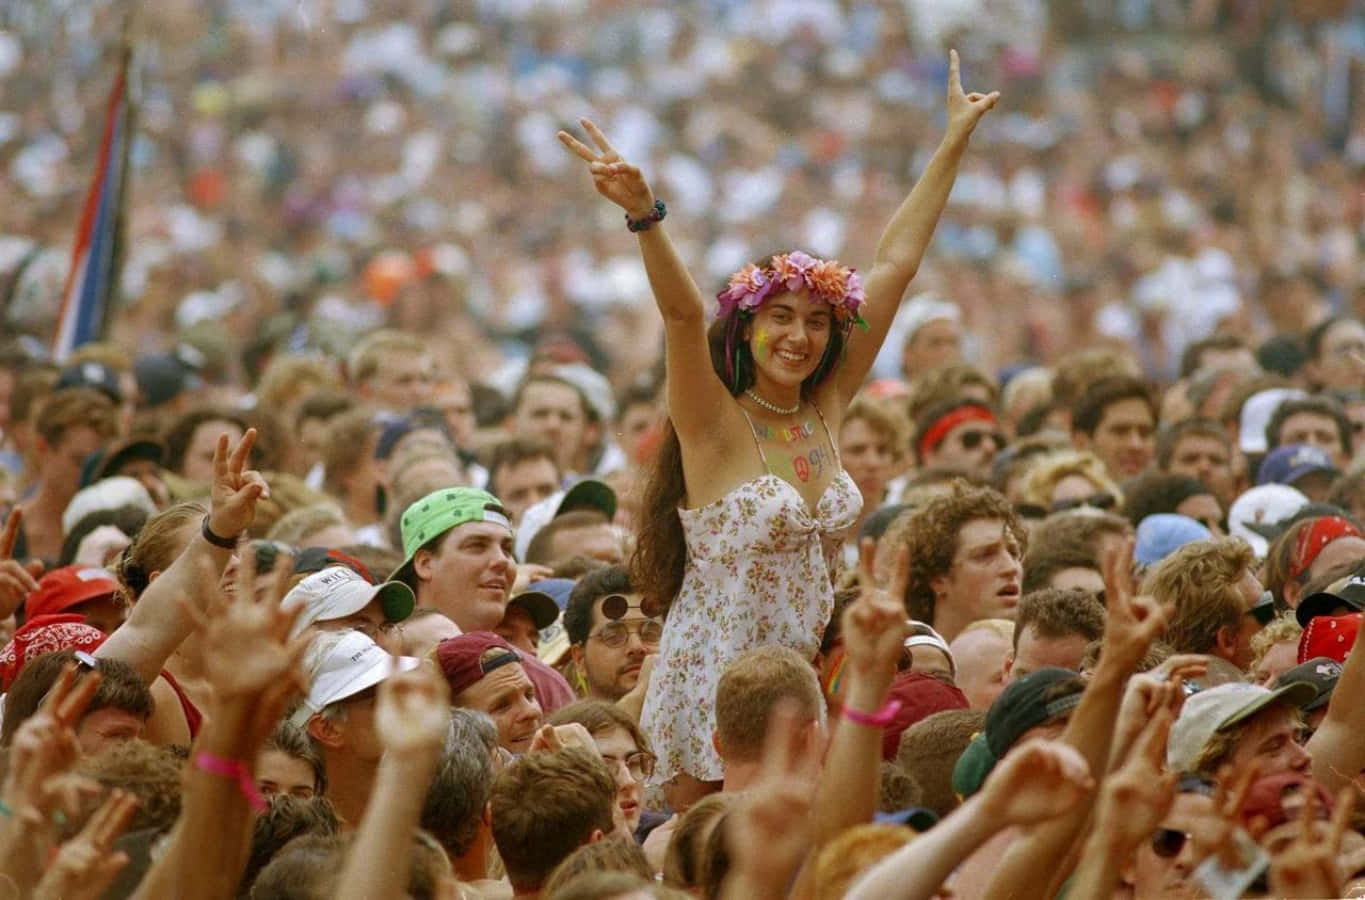 The Iconic Image of the Woodstock Festival of 1969